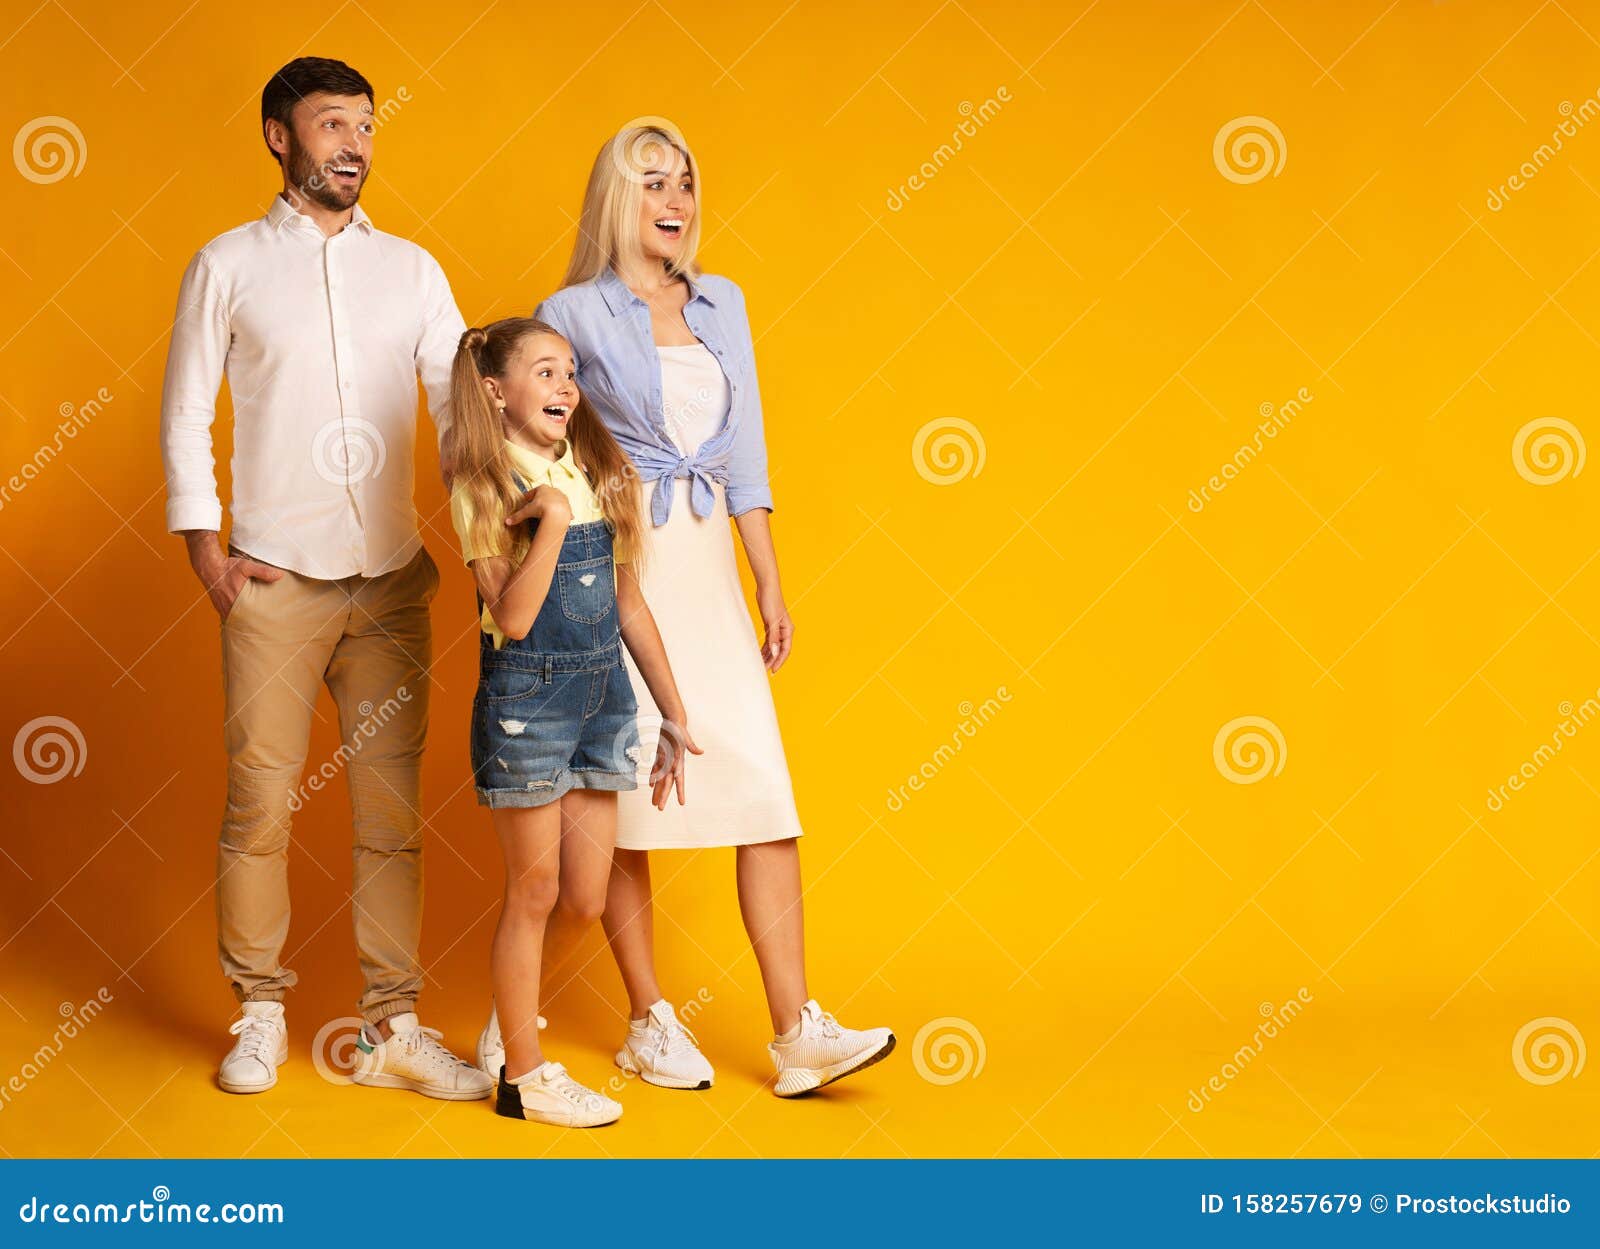 Excited Family Looking at Empty Space Standing Over Yellow Background Stock  Image - Image of parents, three: 158257679